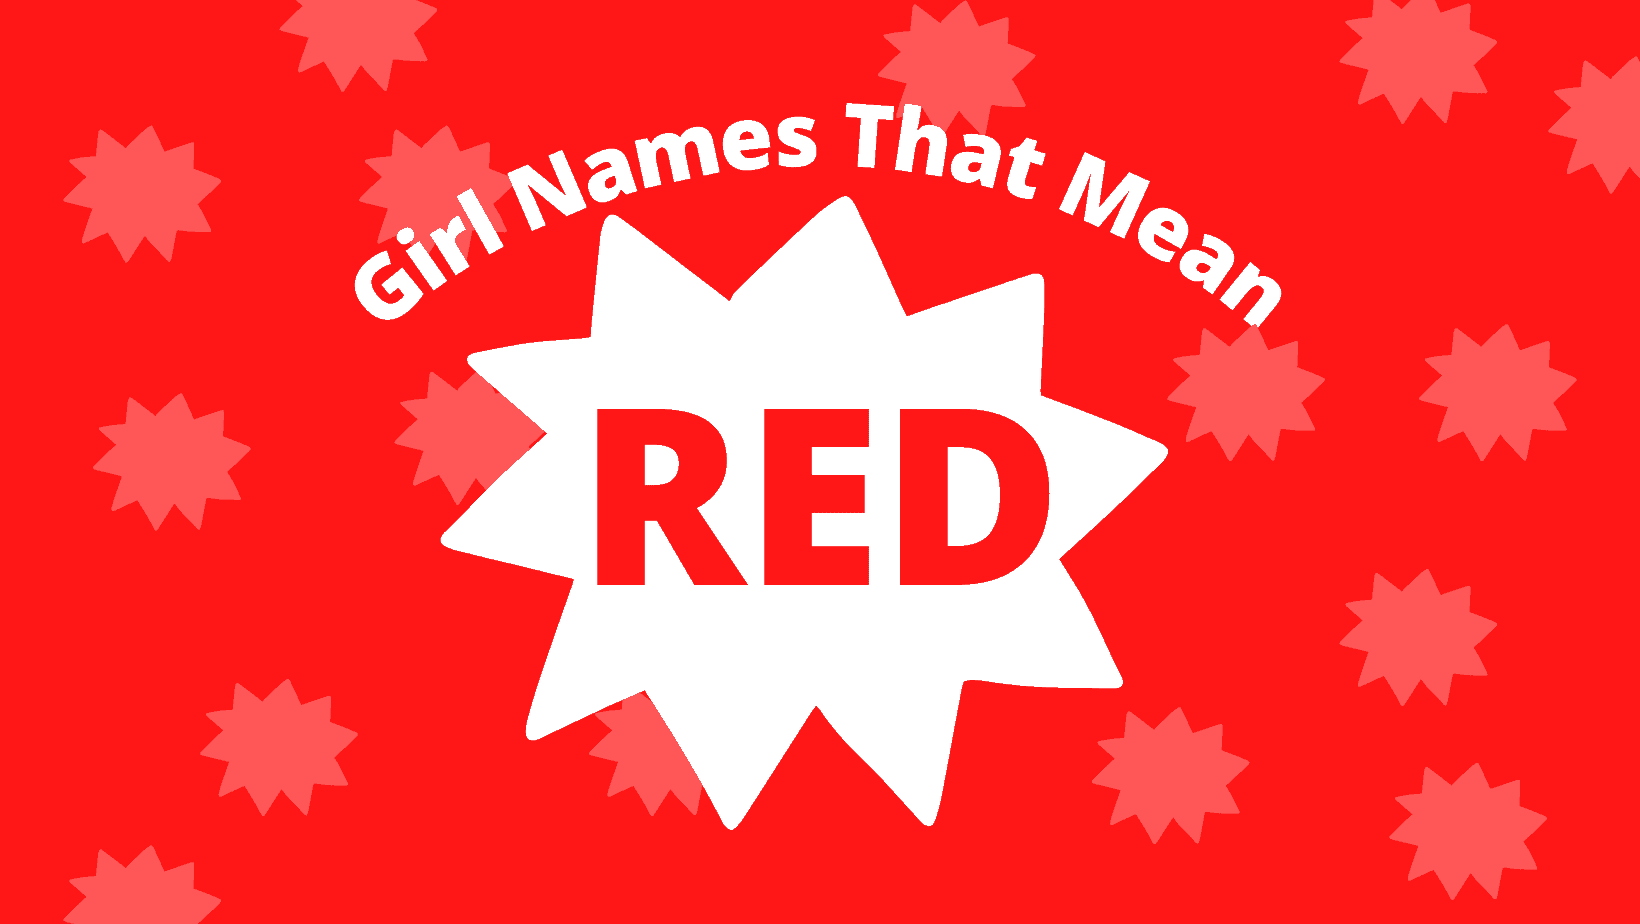 Girl names that mean red